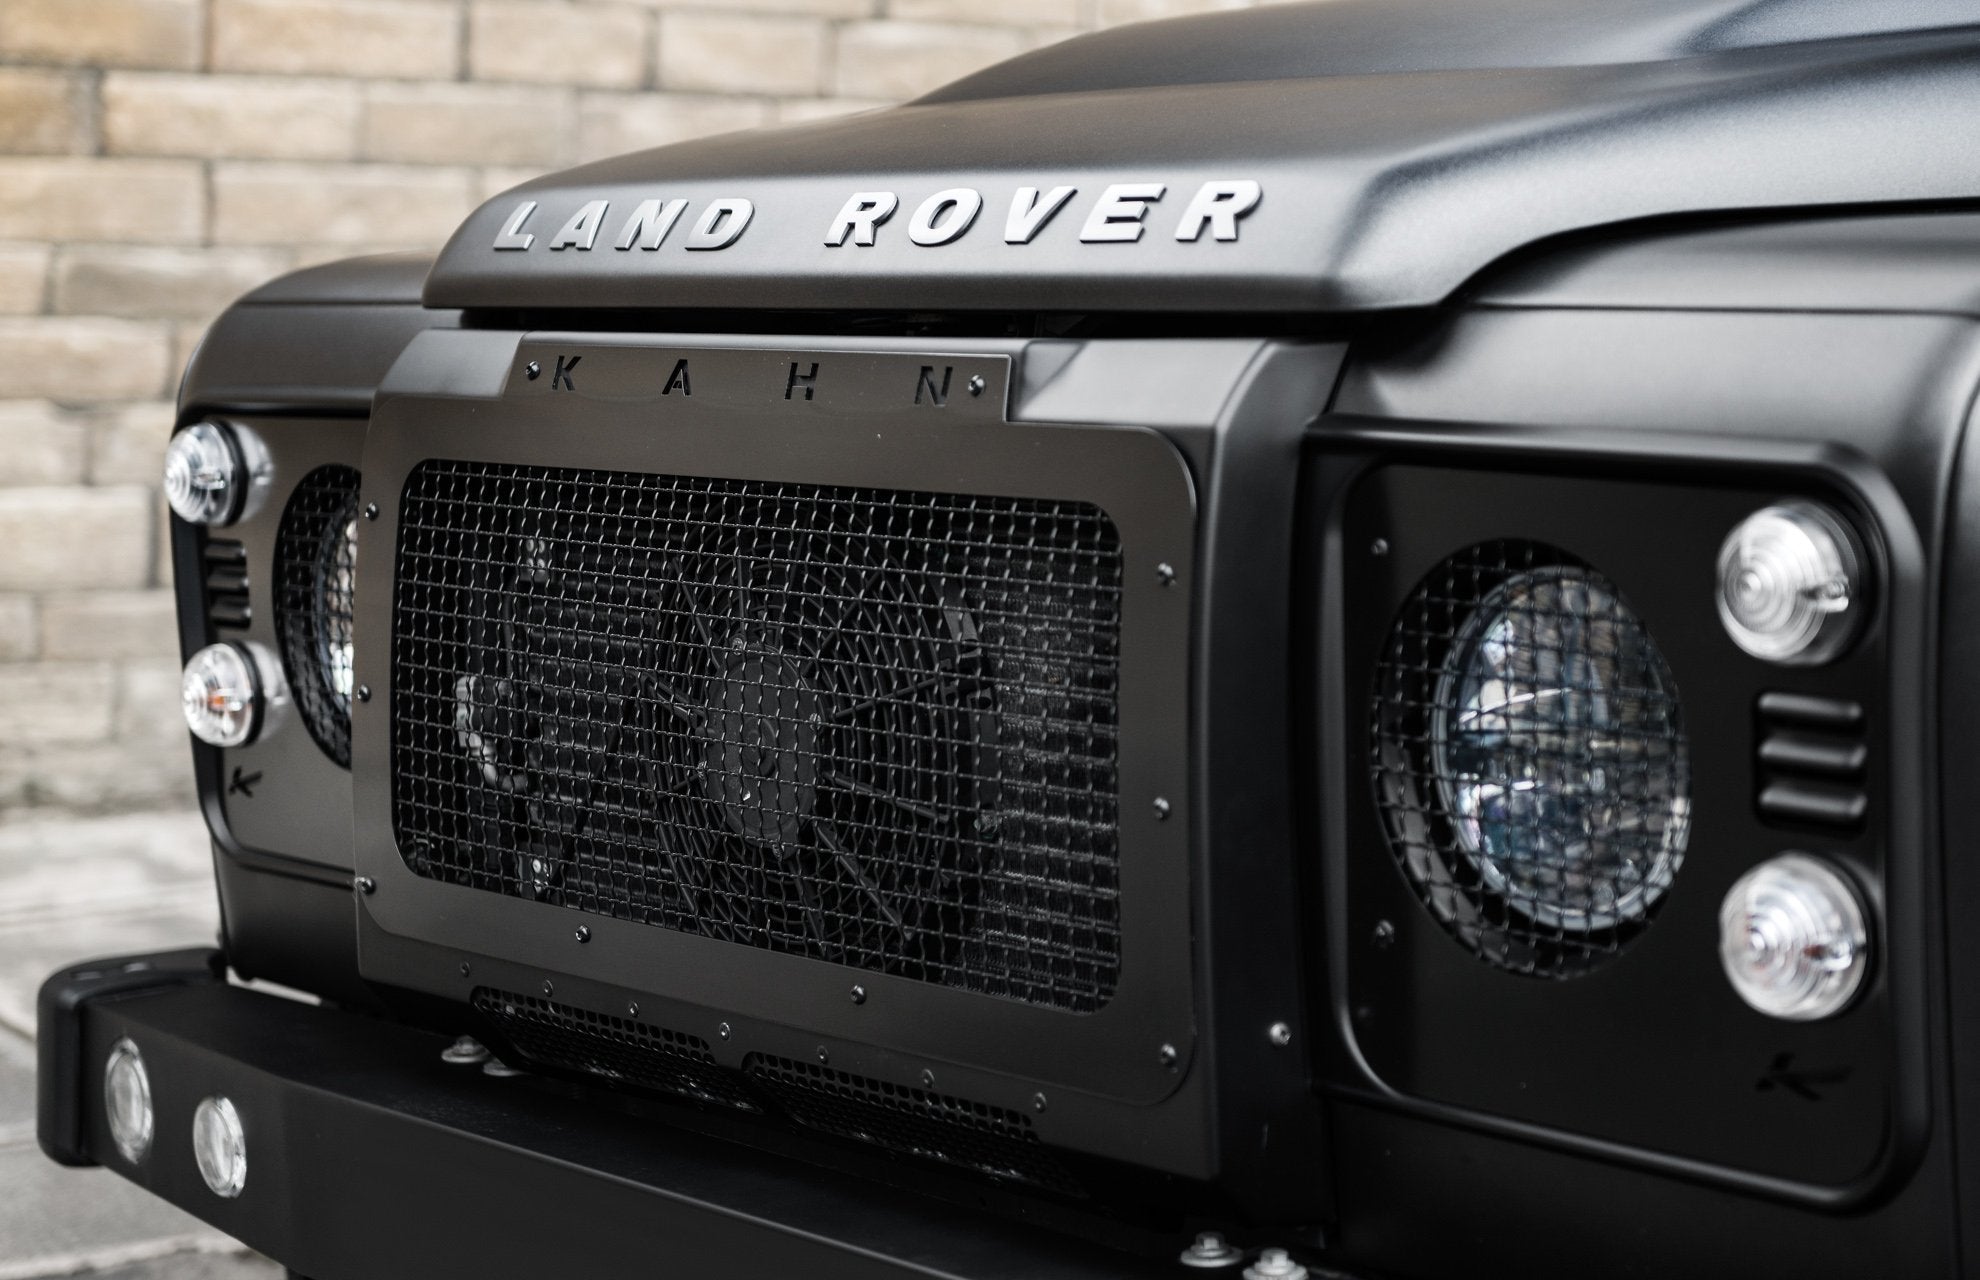 LAND ROVER DEFENDER (1991-2016) 'KAHN' FRONT GRILLE WITH STAINLESS STEEL MESH